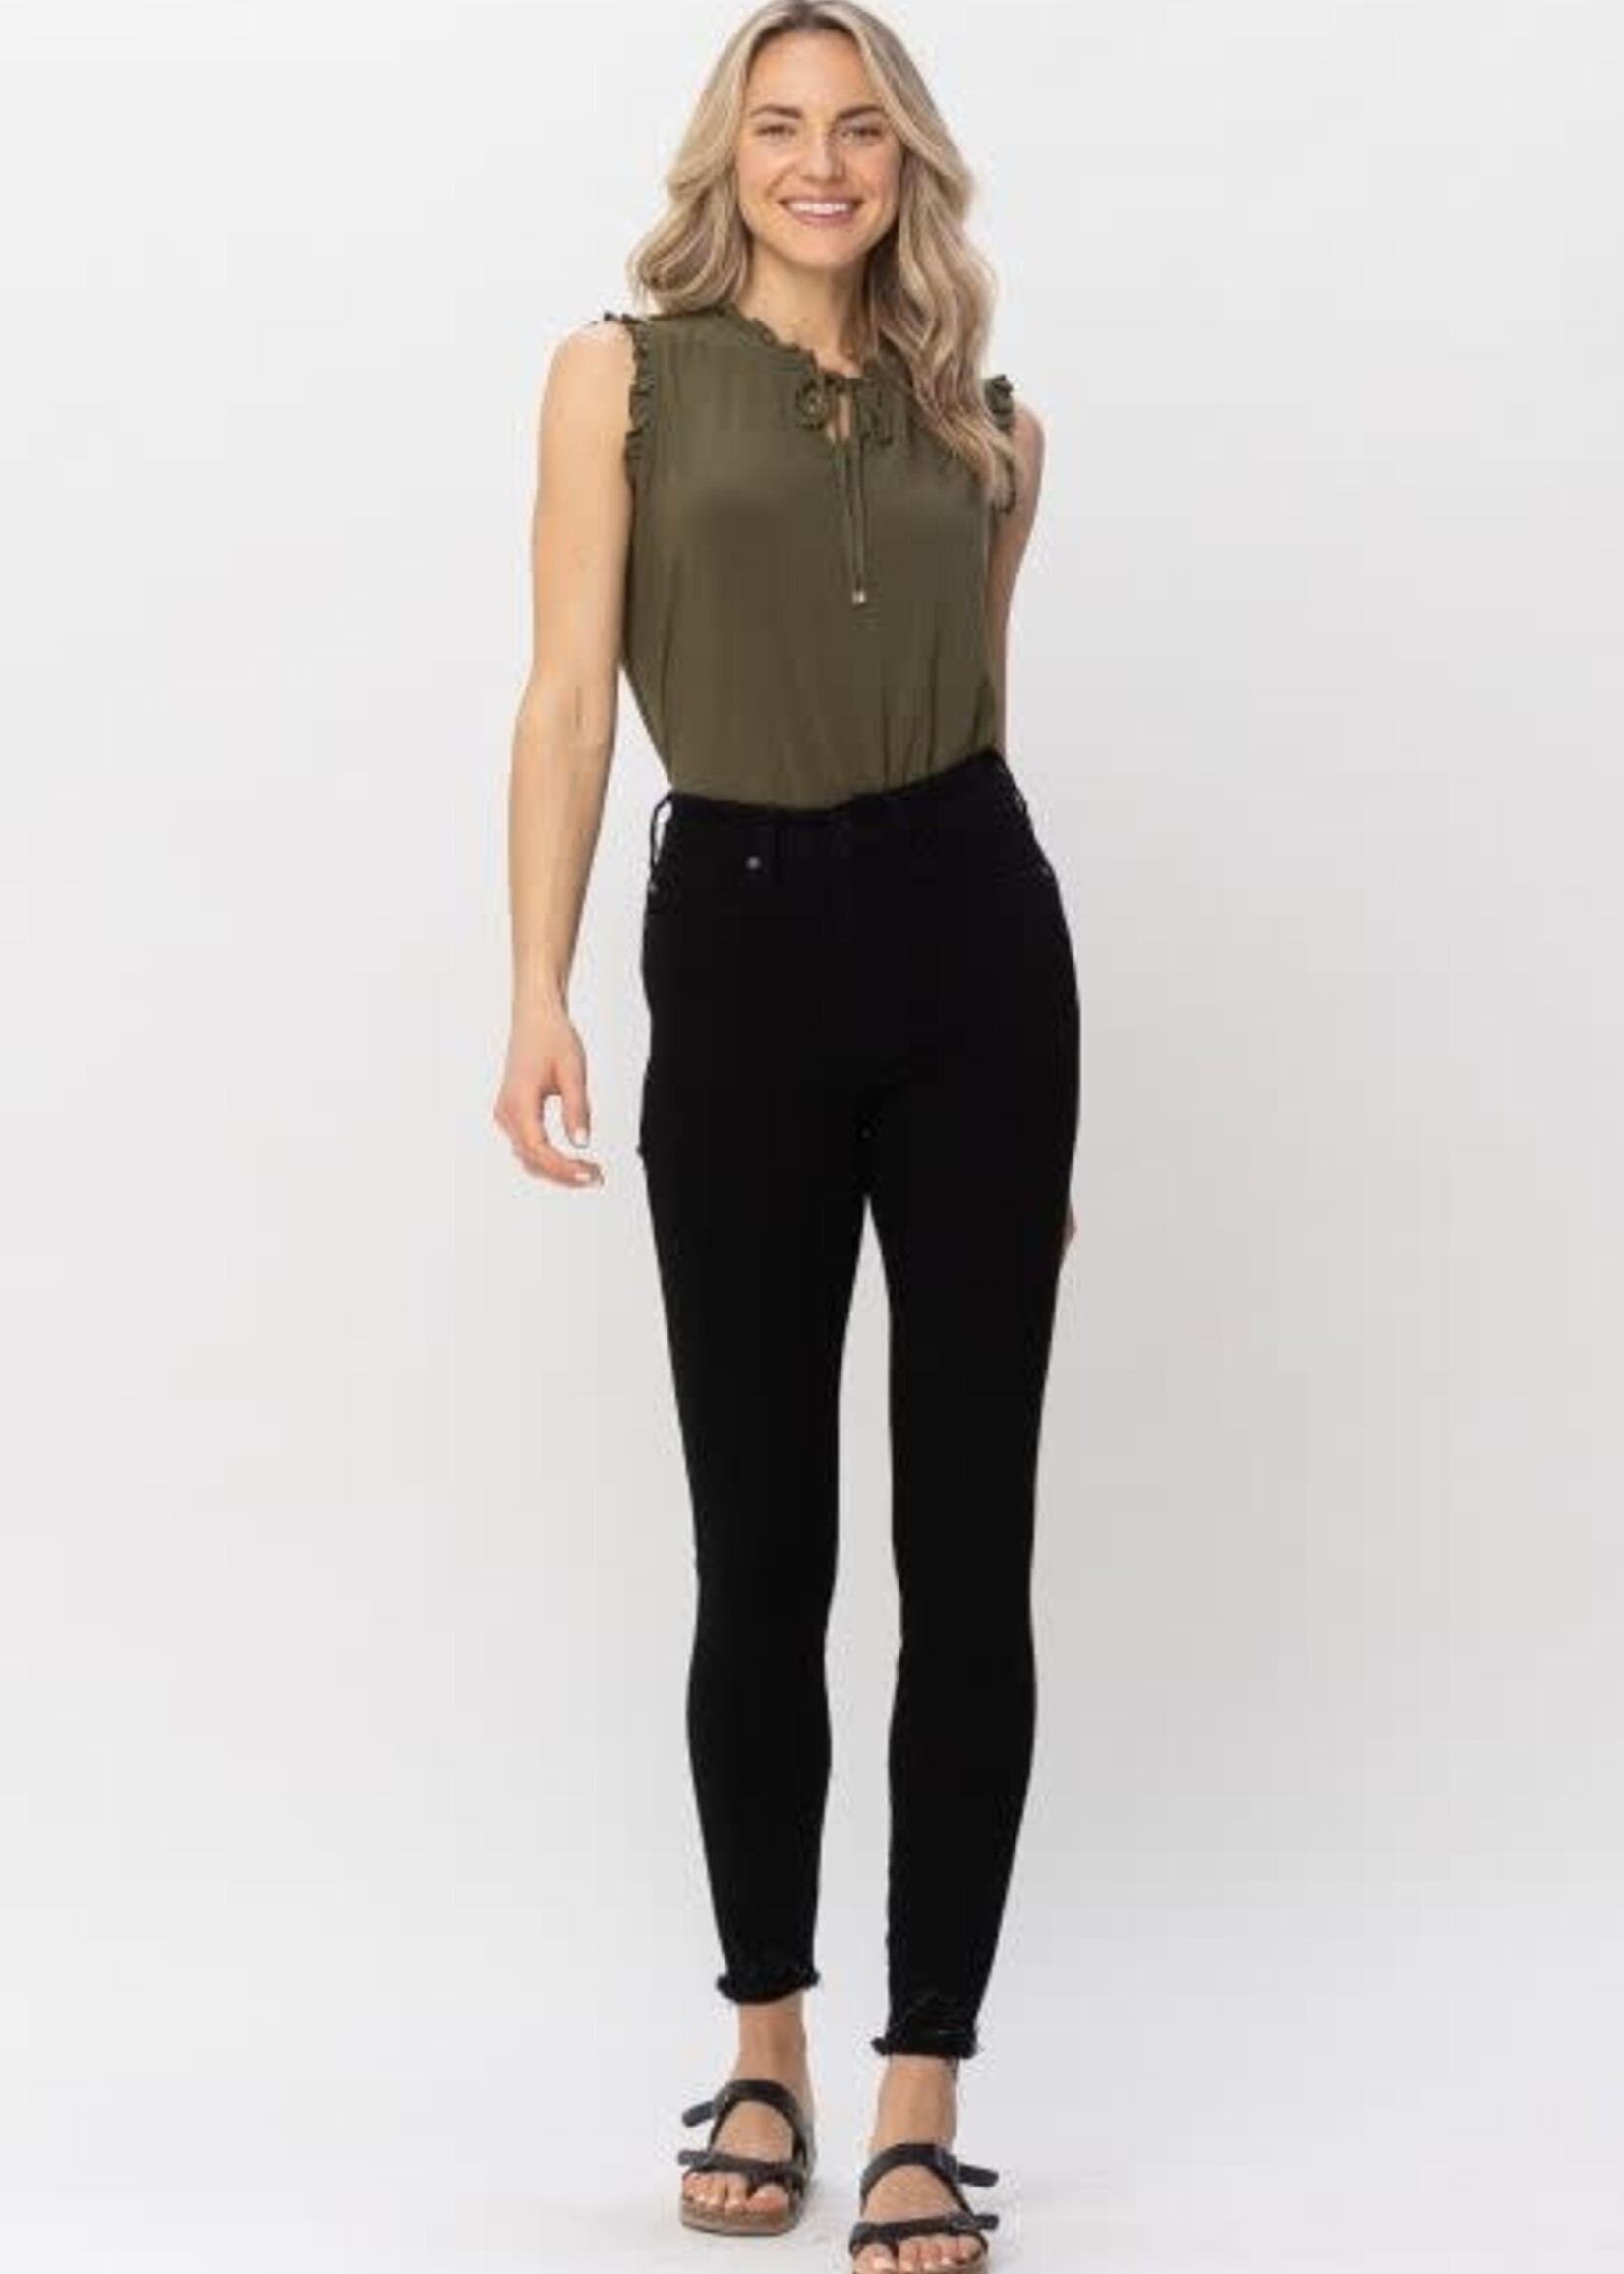 Judy Blue Control top skinny jeans